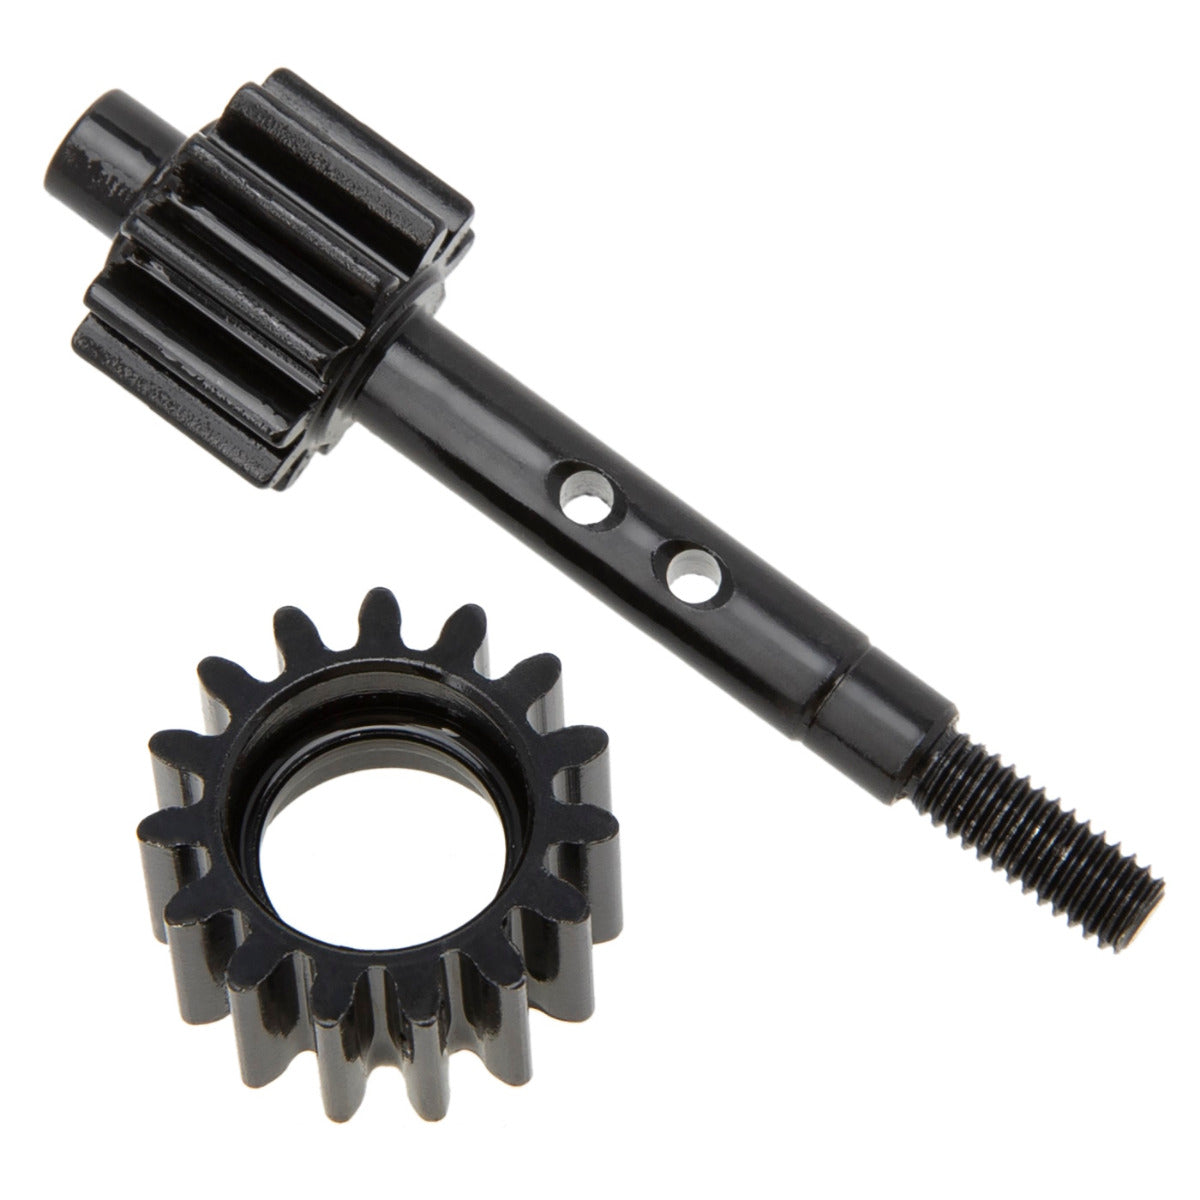 Transmission Gear for 272 Gearbox (gear set reduction ratio 2.73:1) FOR Traxxas Slash 2WD - PowerHobby